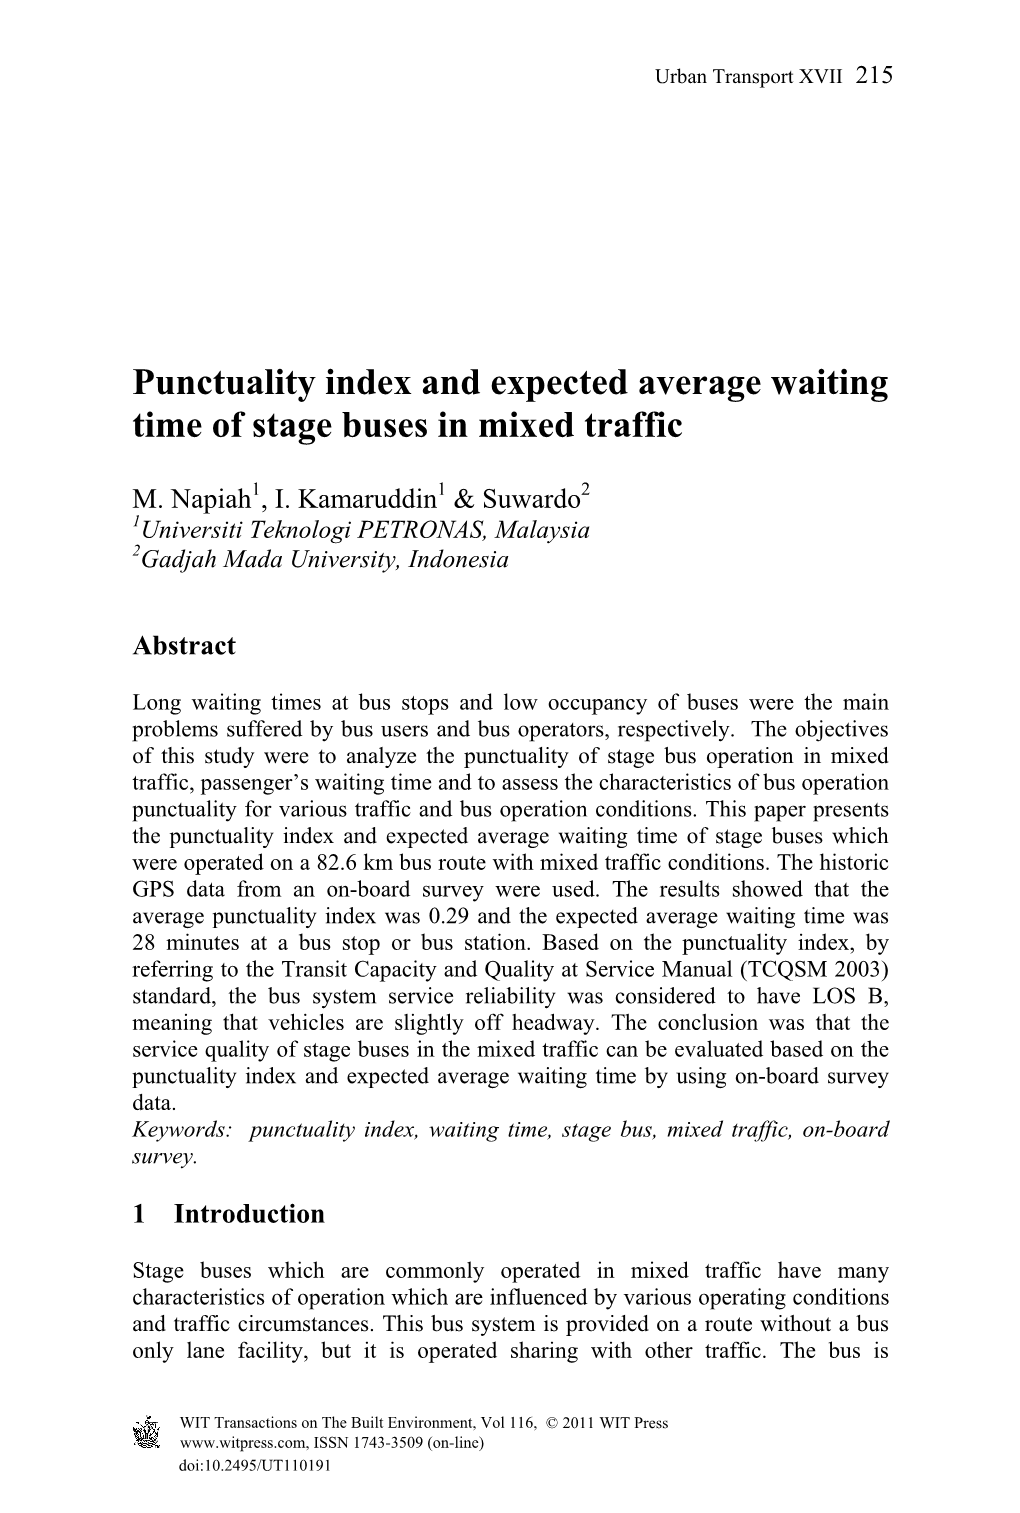 Punctuality Index and Expected Average Waiting Time of Stage Buses in Mixed Traffic